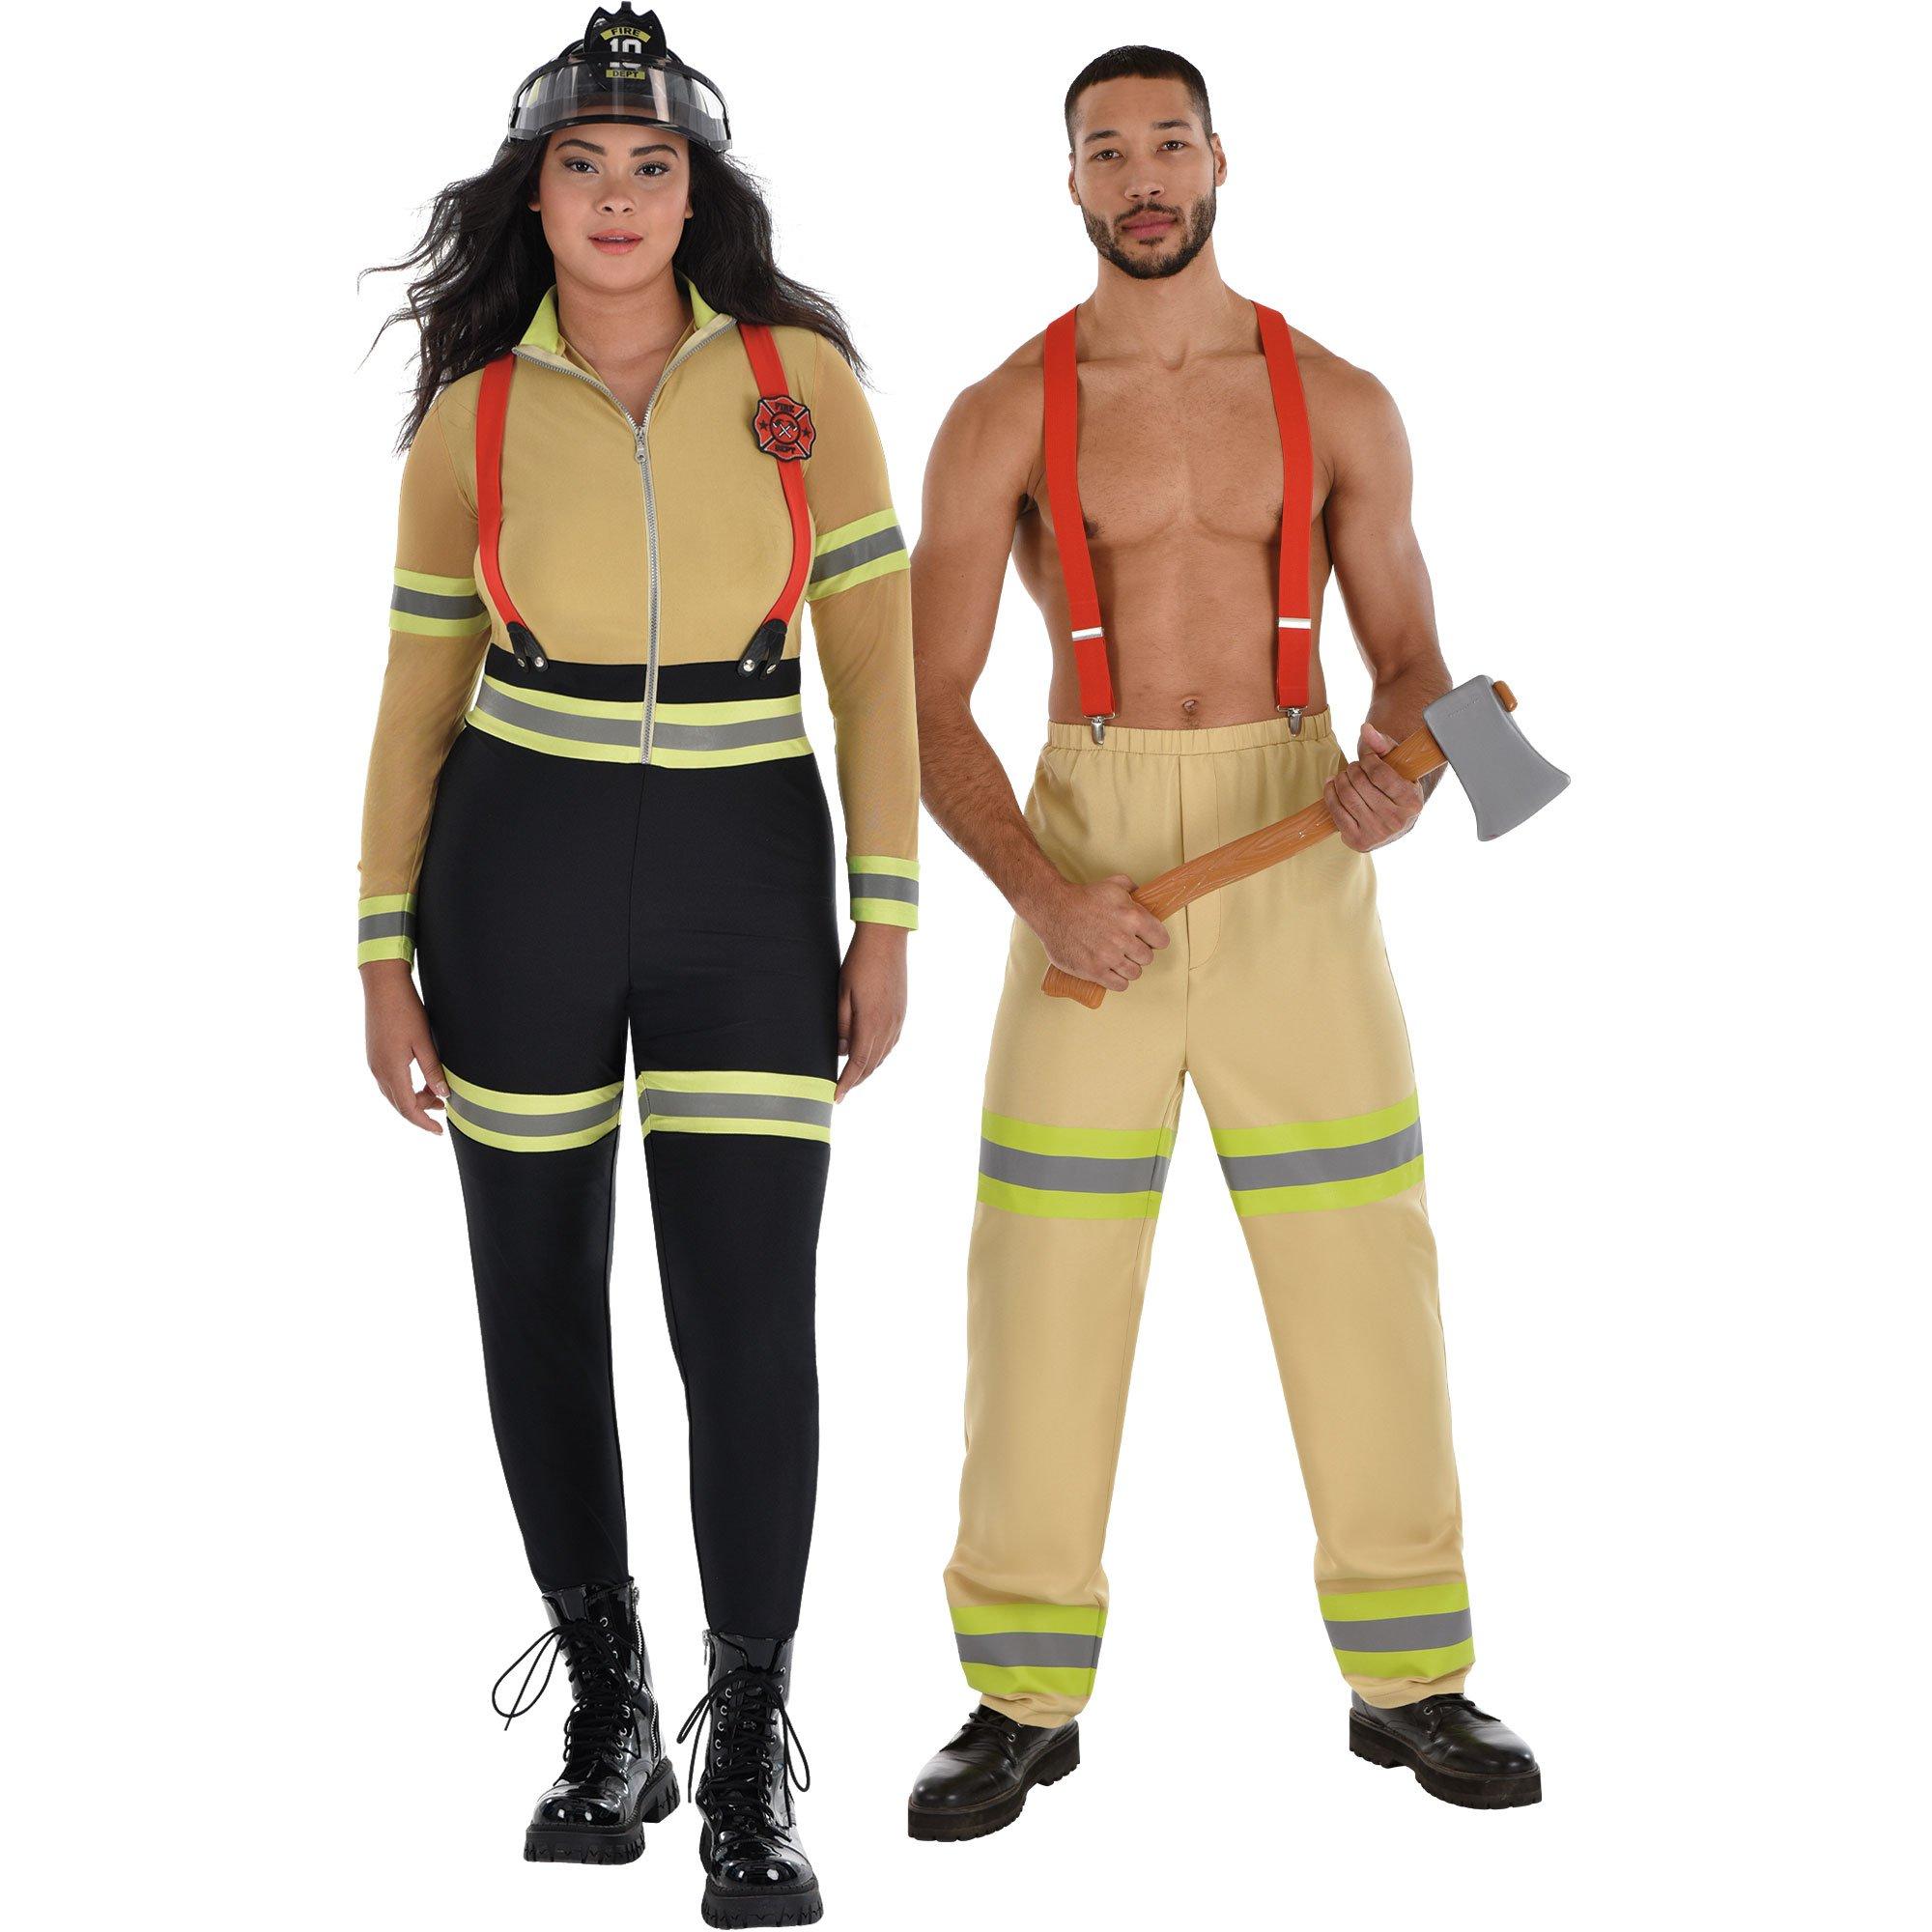 Firefighter Couples Costumes